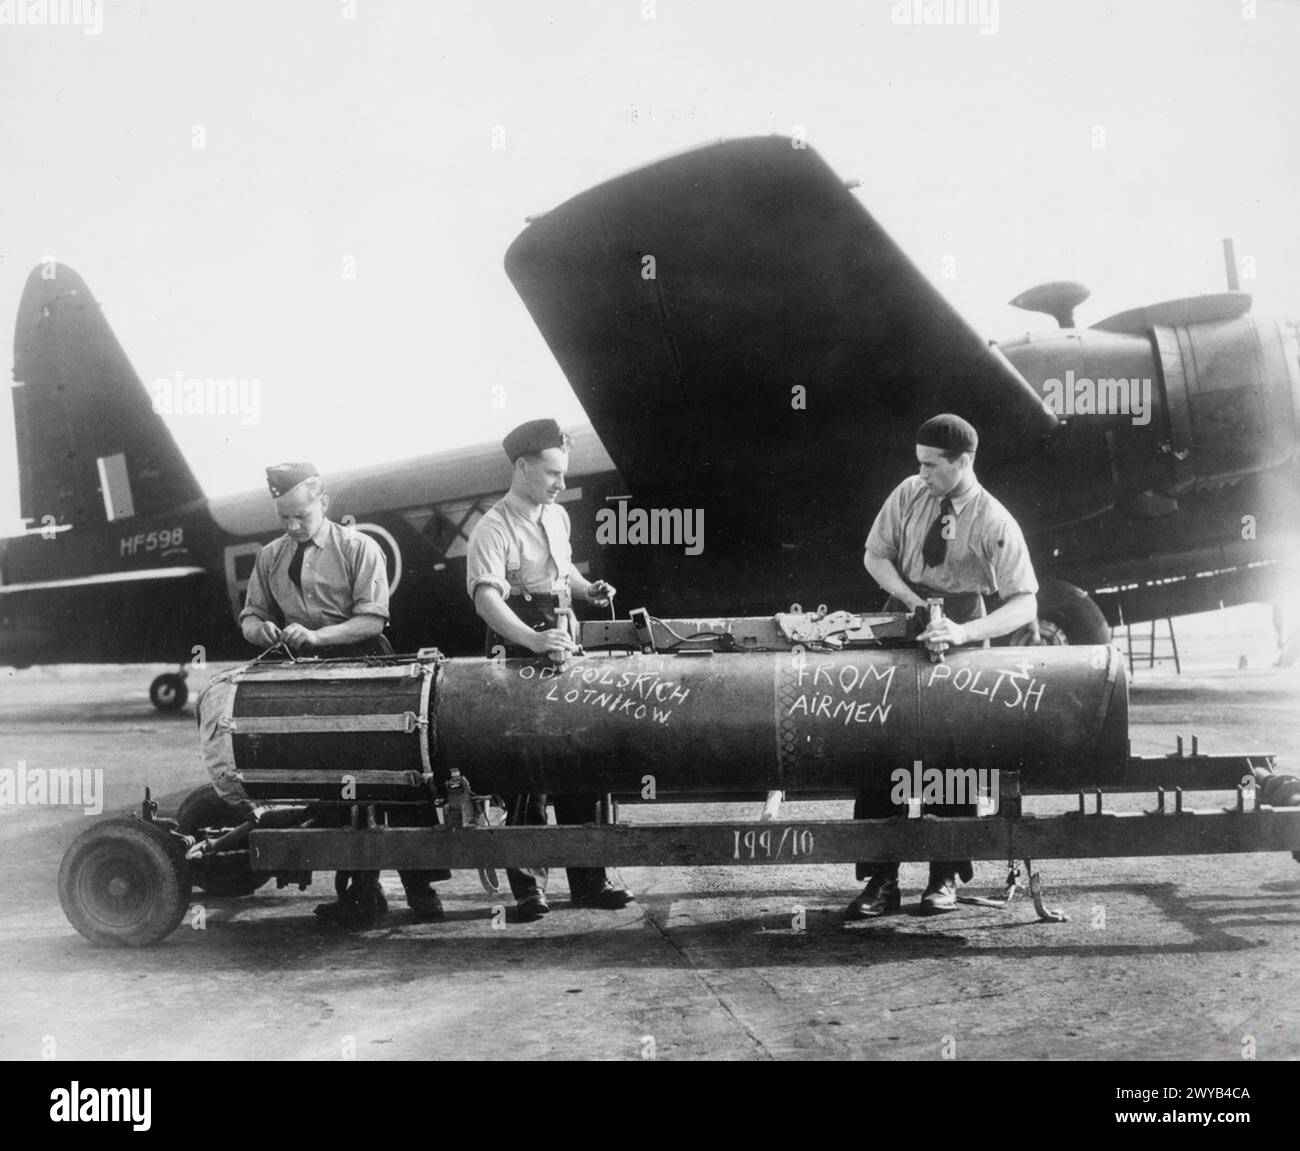 THE POLISH AIR FORCE IN BRITAIN, 1940-1947 - Giant mine is suitably inscribed before it's loaded into a waiting Vickers Wellington bomber (BH-E, HF598) of No. 300 Polish Bomber Squadron. The message on the mine reads: 'Od polskich lotników - From Polish Airmen' both in Polish and English. RAF Faldingworth, 25 May 1944. , Polish Air Force, Polish Air Force, 300 'Land of Masovia' Bomber Squadron Stock Photo